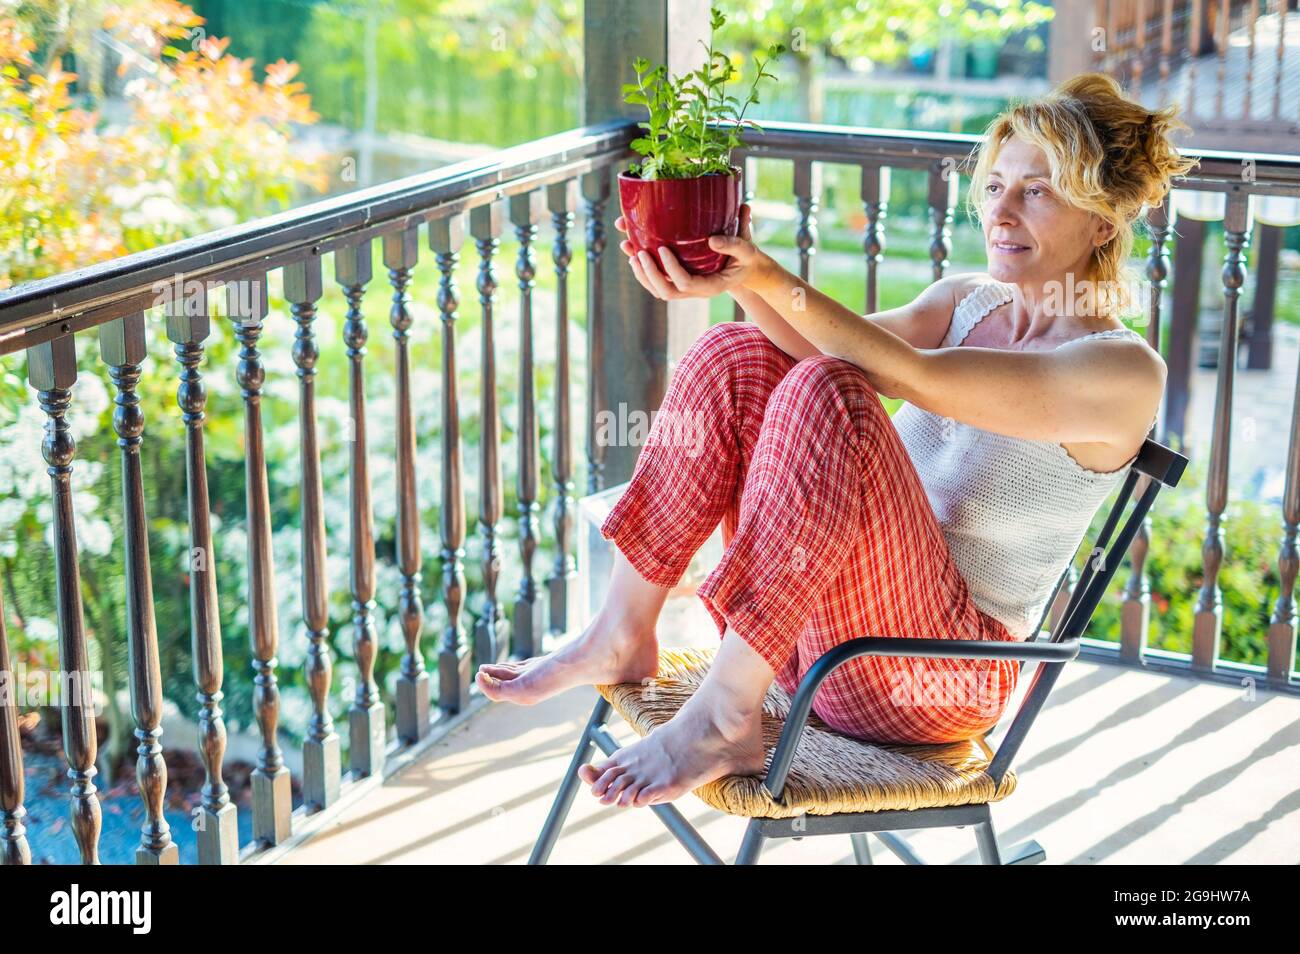 portrait of a young mature caucasian blonde woman relaxing at home on the porch sitting in a rocking chair with a potted plant. Lifestyle concept. Stock Photo